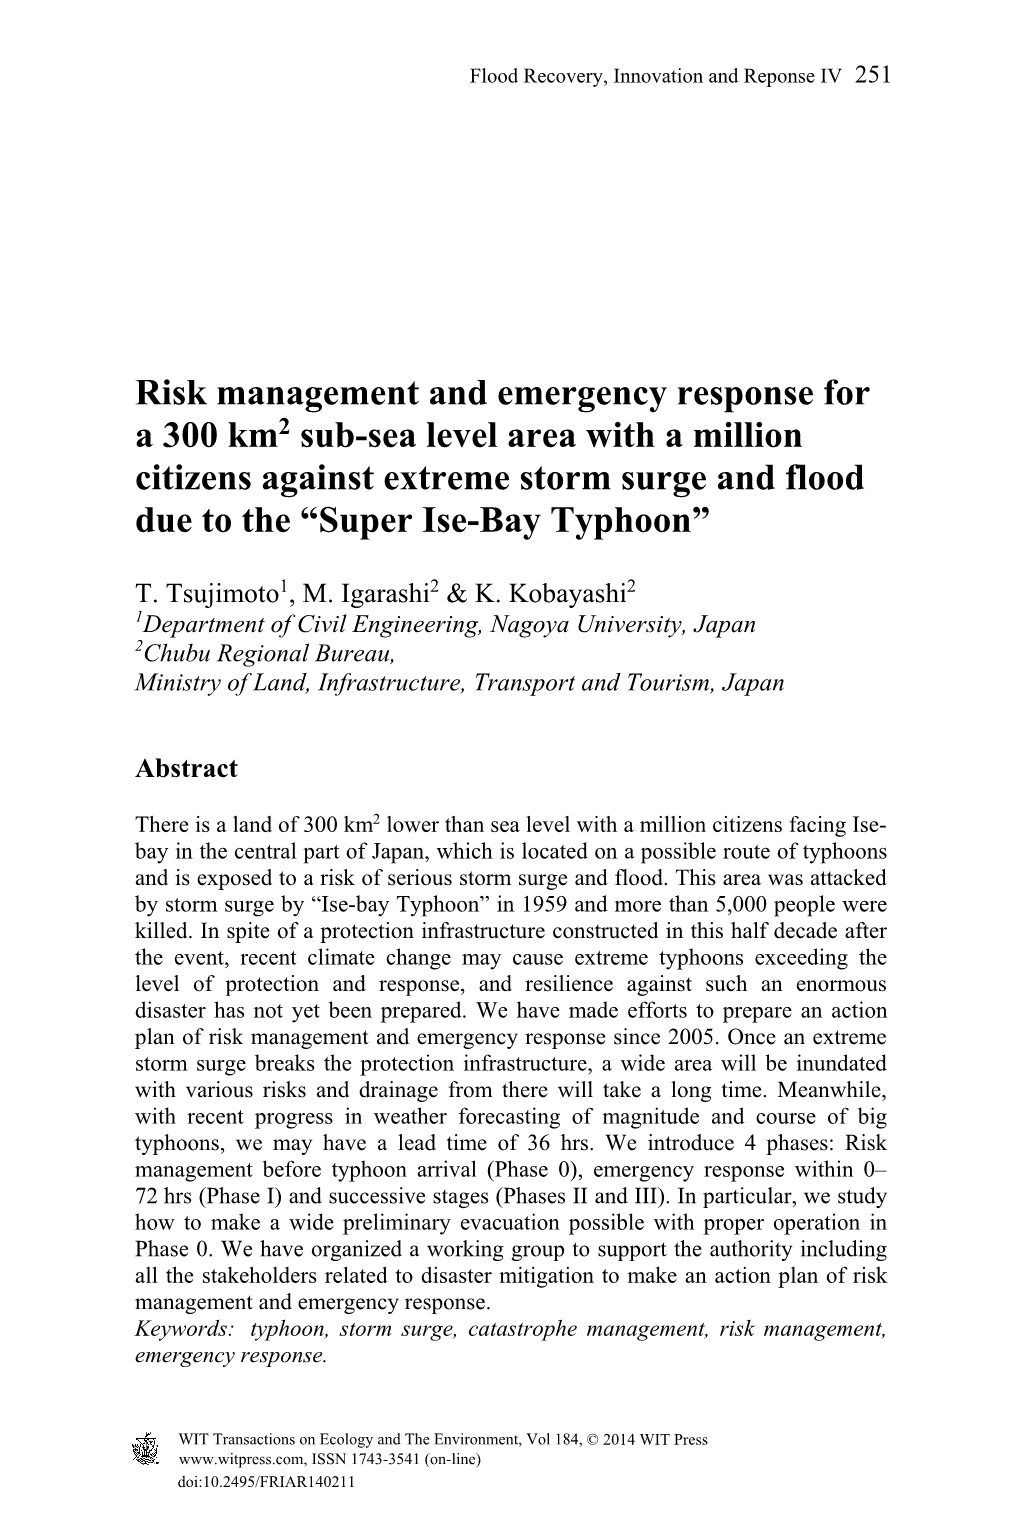 Risk Management and Emergency Response for a 300 Km2 Sub-Sea